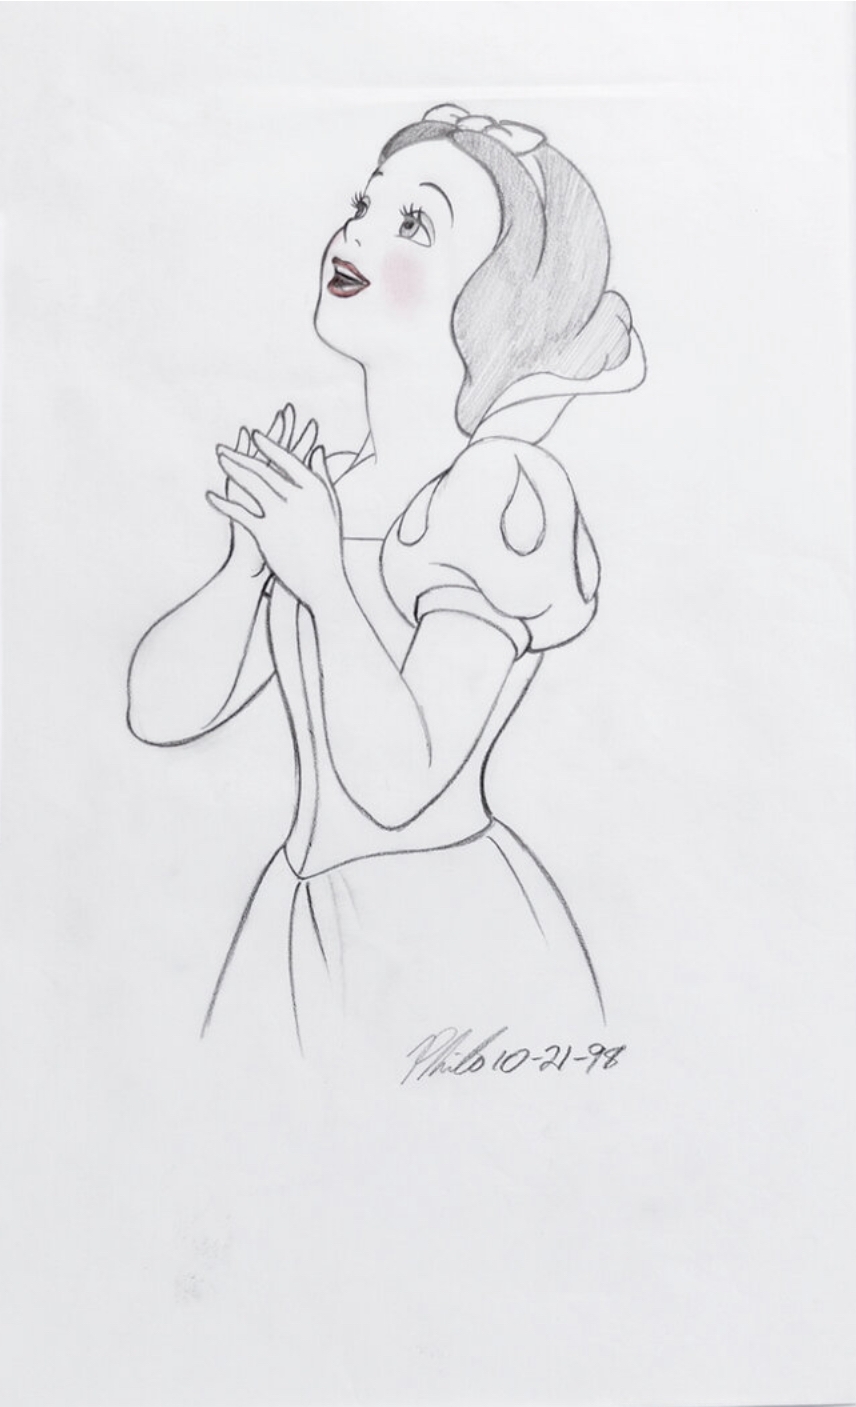 Snow White Coloring Pages - Fairy Tales